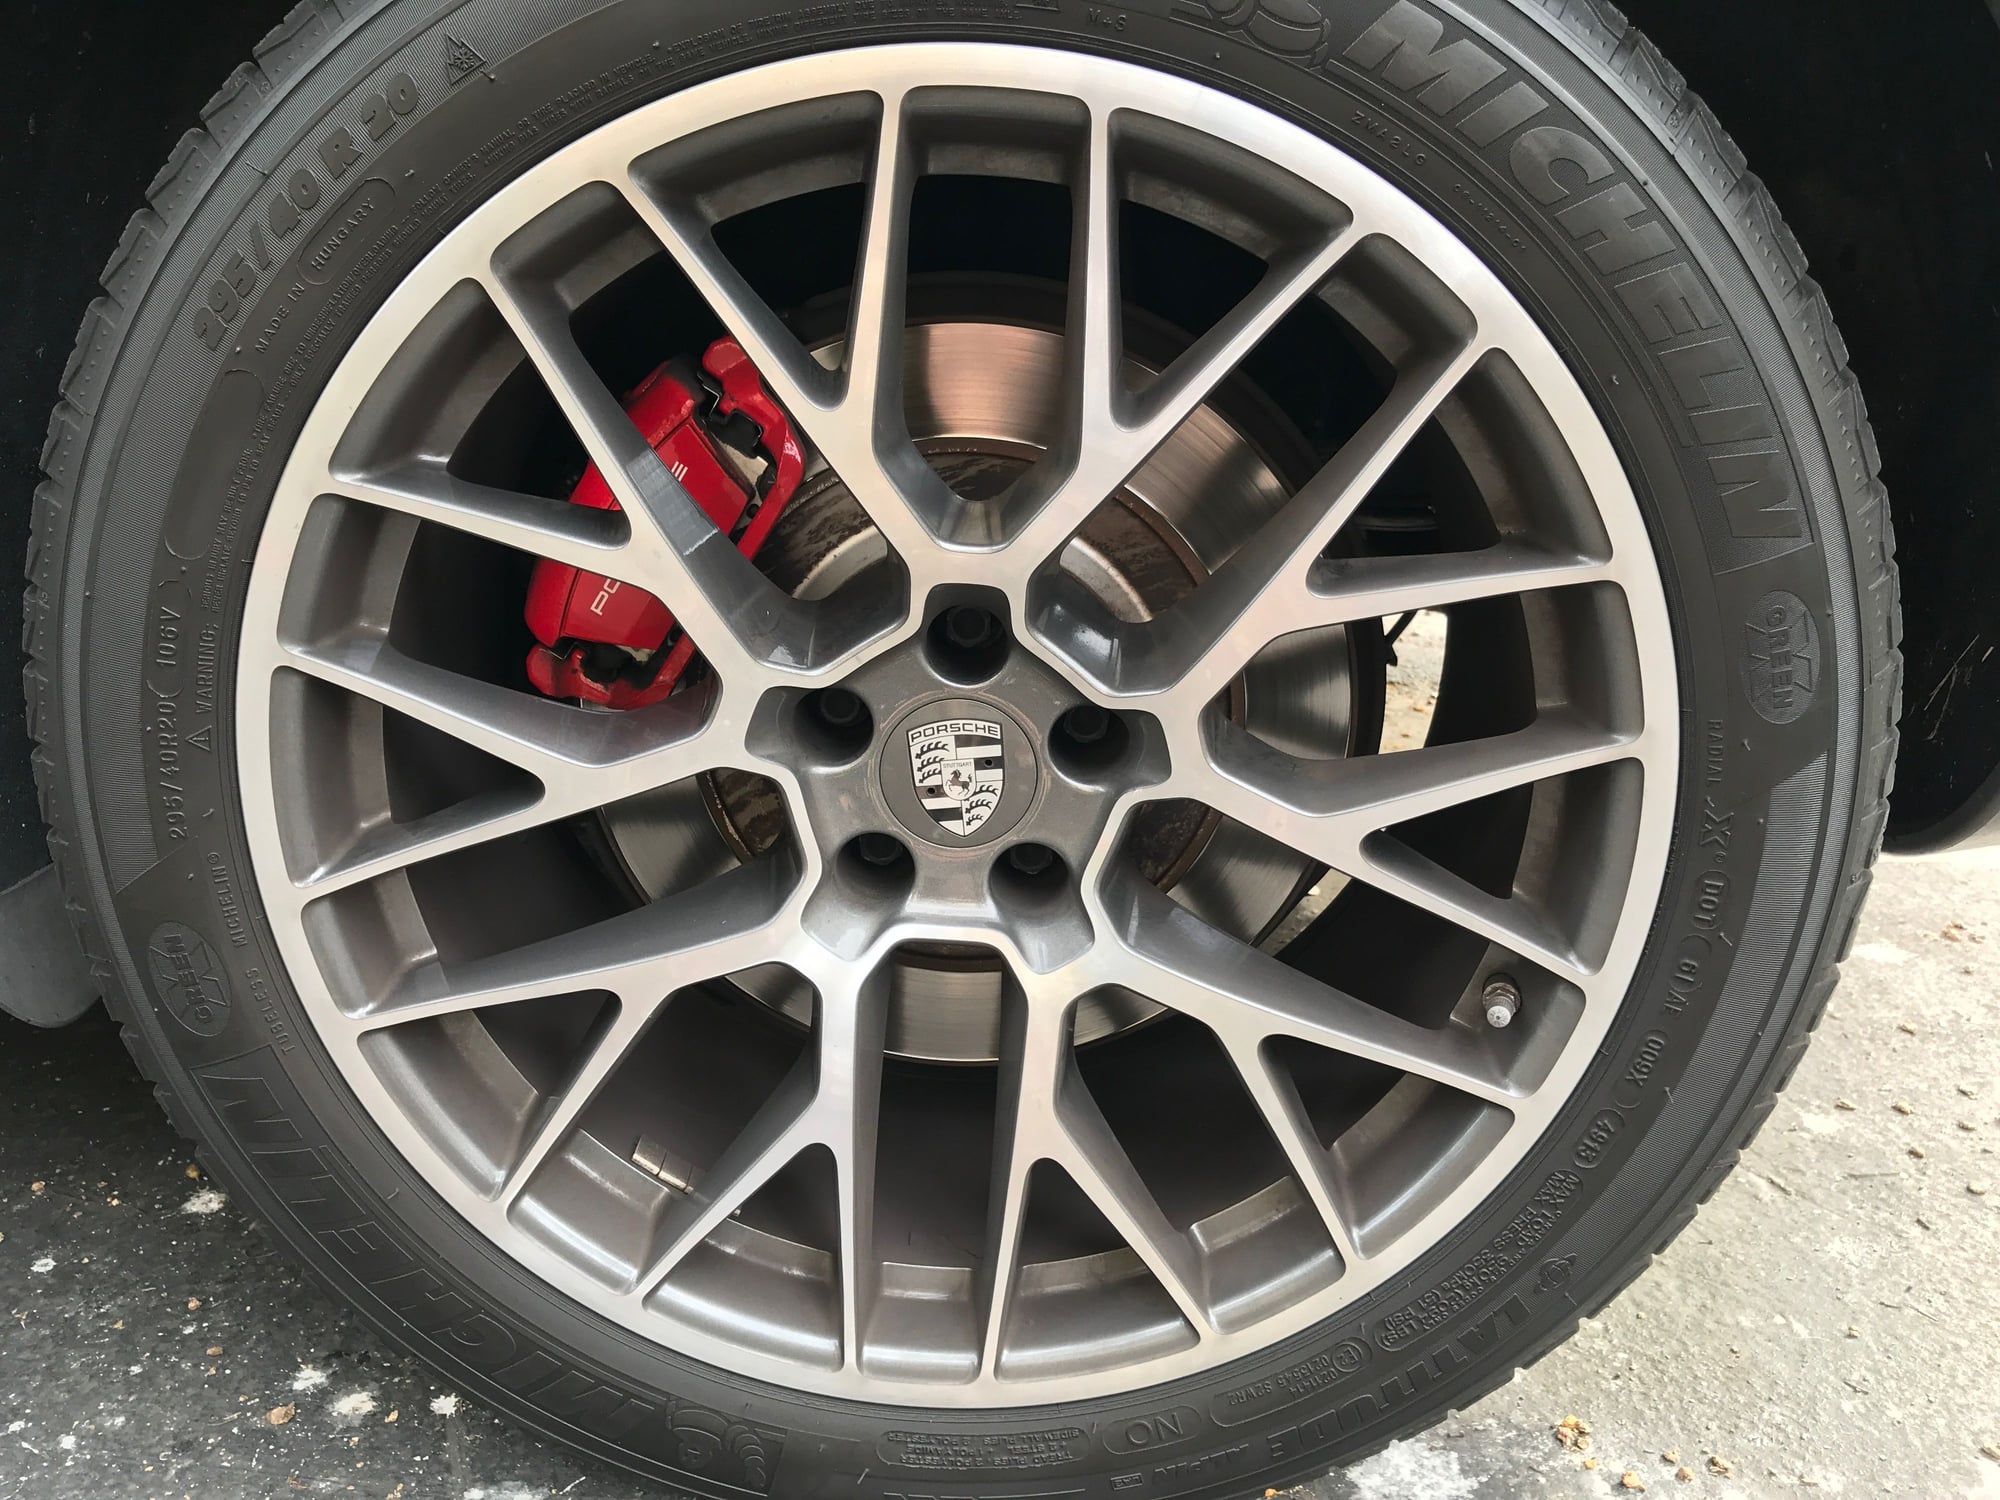 Wheels and Tires/Axles - Set of 20" Turbo Spyder Wheels off my 2015 Macan Turbo - Like new - Used - Culver City, CA 90230, United States